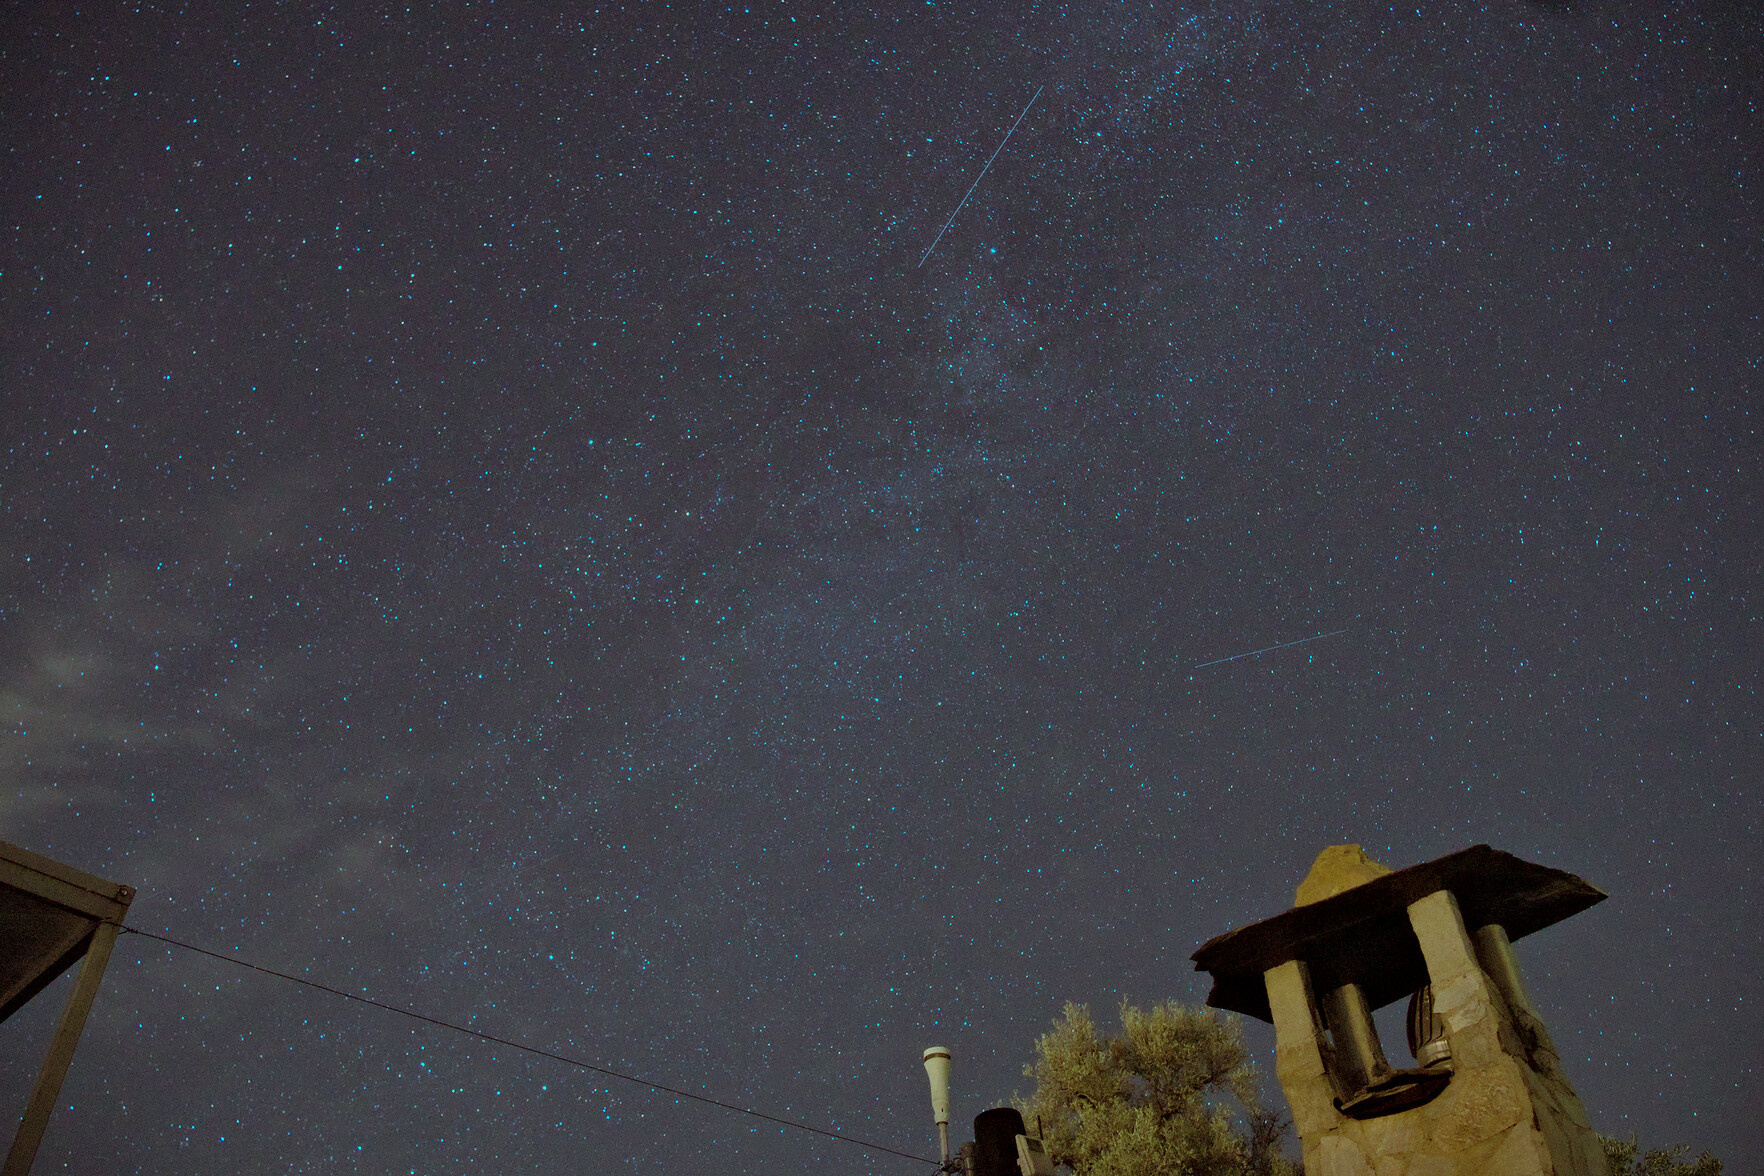 A night sky full of stars with a few satellite lines showing. At the foot of the image is a chimney and a weather station